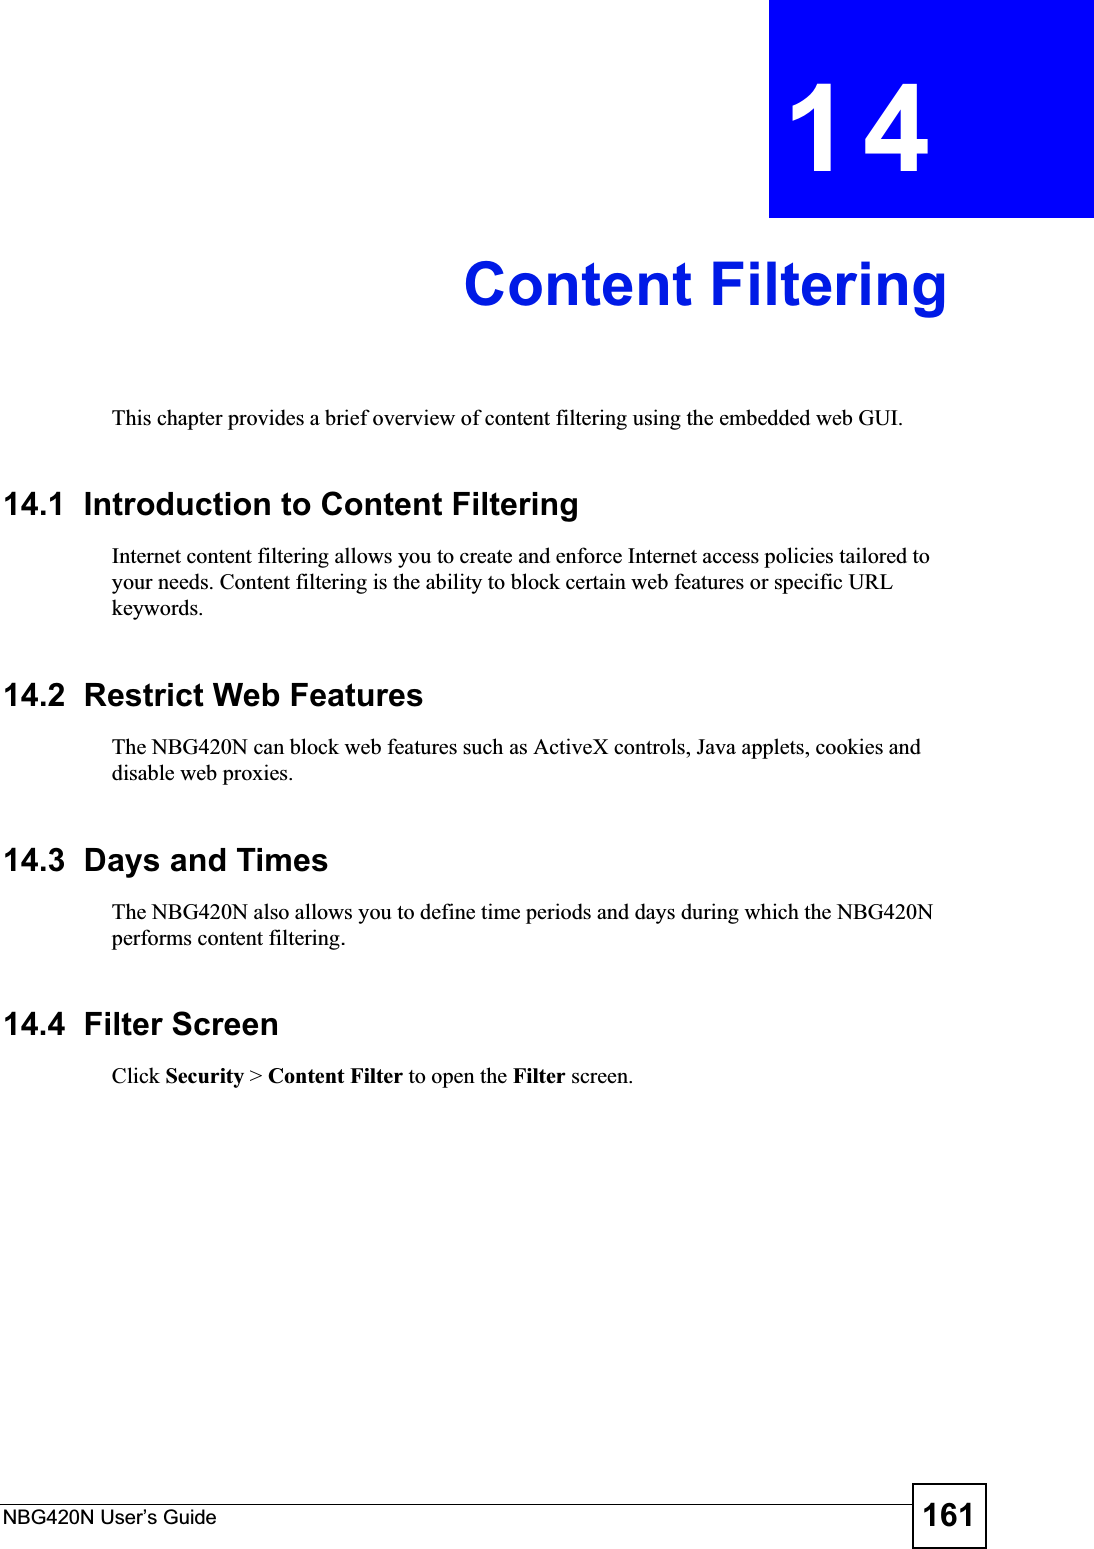 NBG420N User’s Guide 161CHAPTER 14Content FilteringThis chapter provides a brief overview of content filtering using the embedded web GUI.14.1  Introduction to Content FilteringInternet content filtering allows you to create and enforce Internet access policies tailored to your needs. Content filtering is the ability to block certain web features or specific URL keywords.14.2  Restrict Web FeaturesThe NBG420N can block web features such as ActiveX controls, Java applets, cookies and disable web proxies. 14.3  Days and TimesThe NBG420N also allows you to define time periods and days during which the NBG420N performs content filtering.14.4  Filter ScreenClick Security &gt; Content Filter to open the Filter screen. 